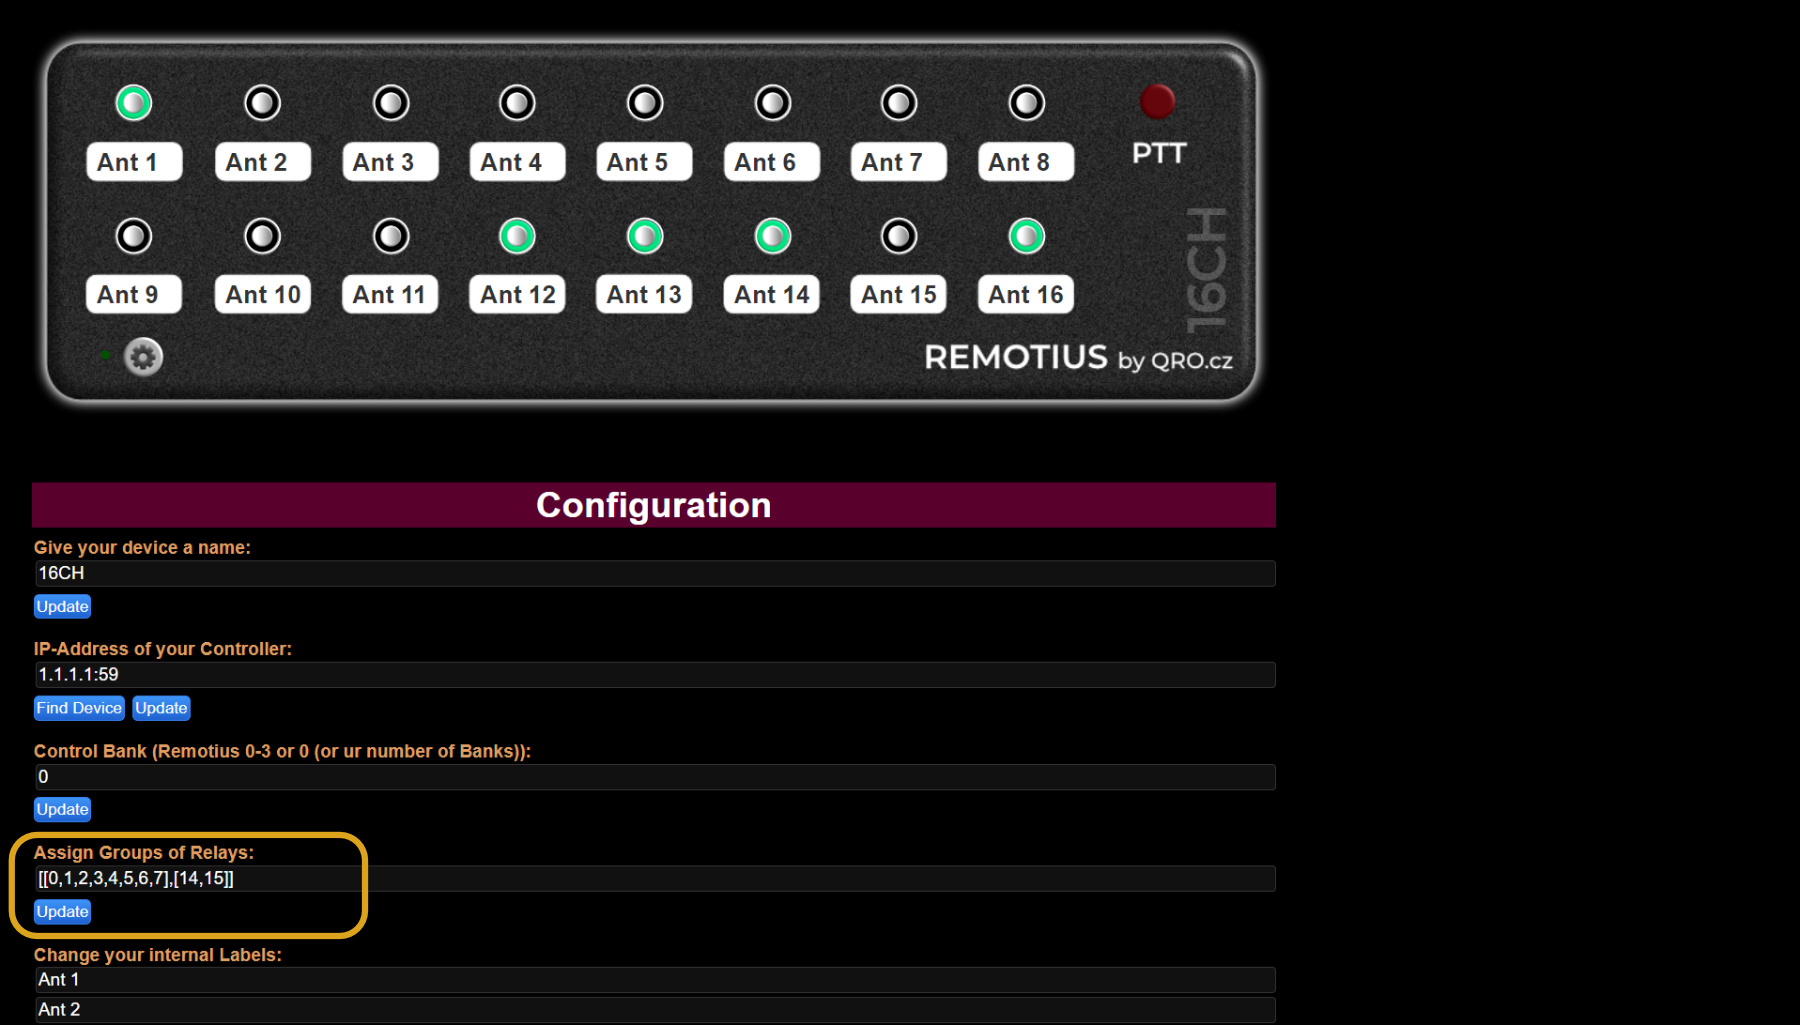 remote control example grouping buttons qro.cz hamparts.shop